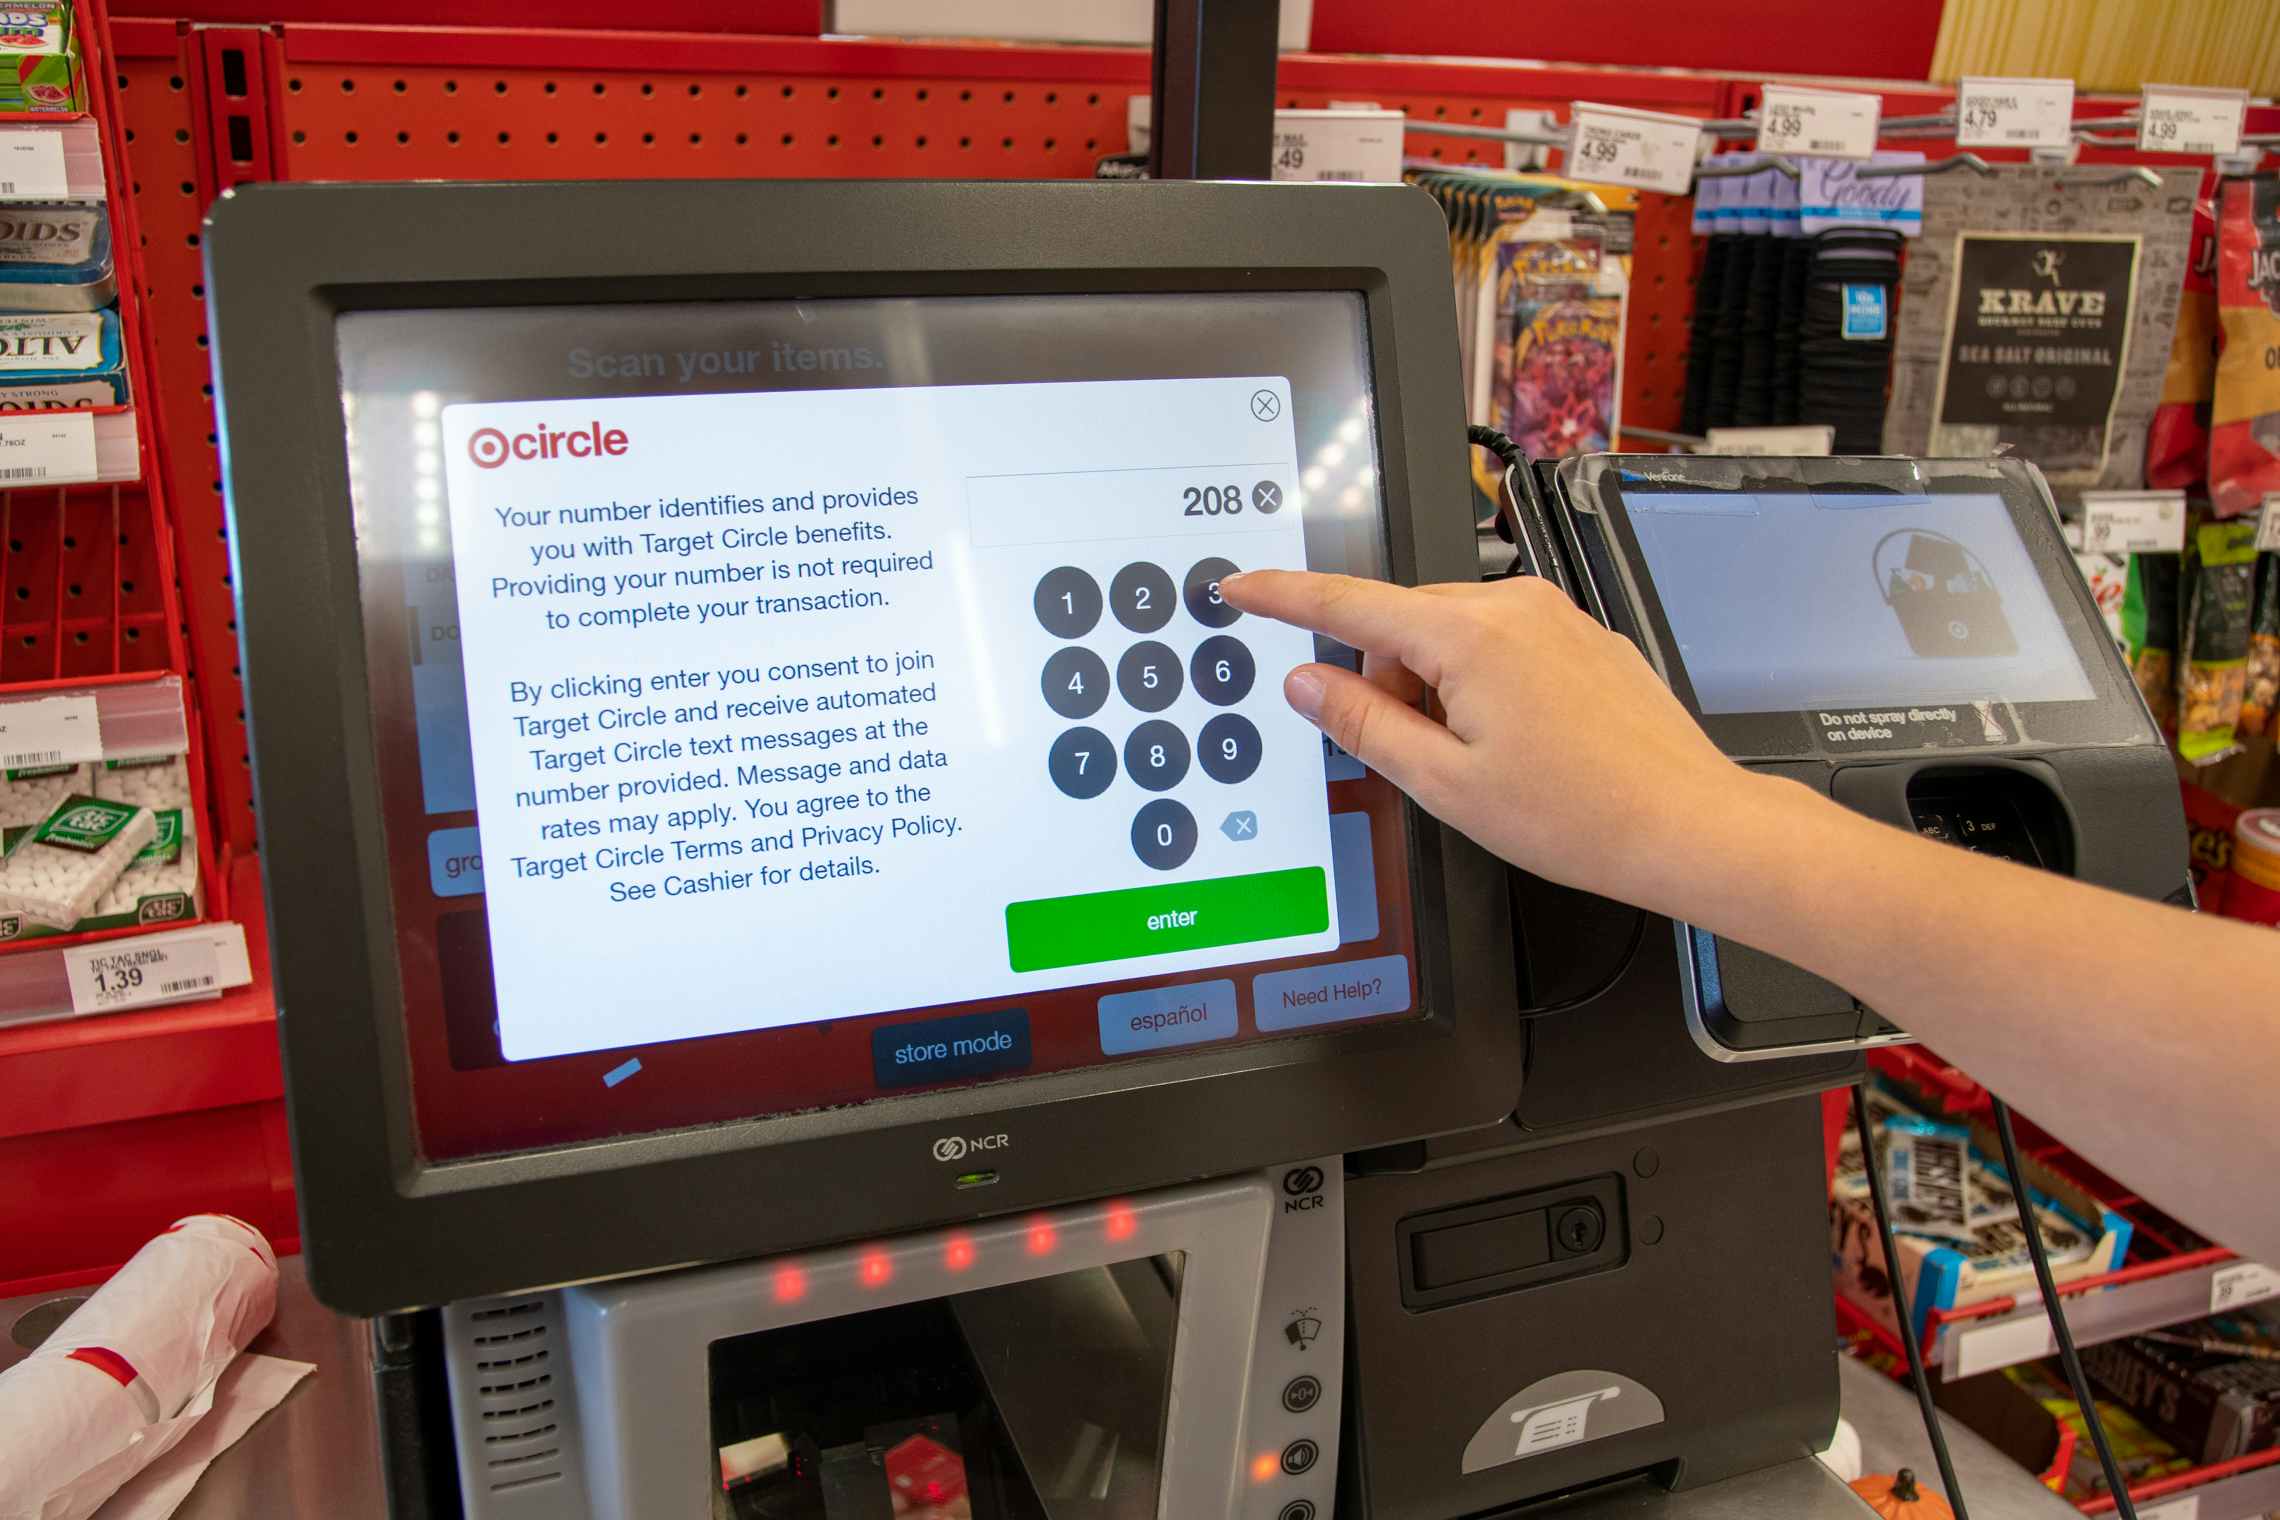 A person typing in their phone number for Target Circle at self-checkout.